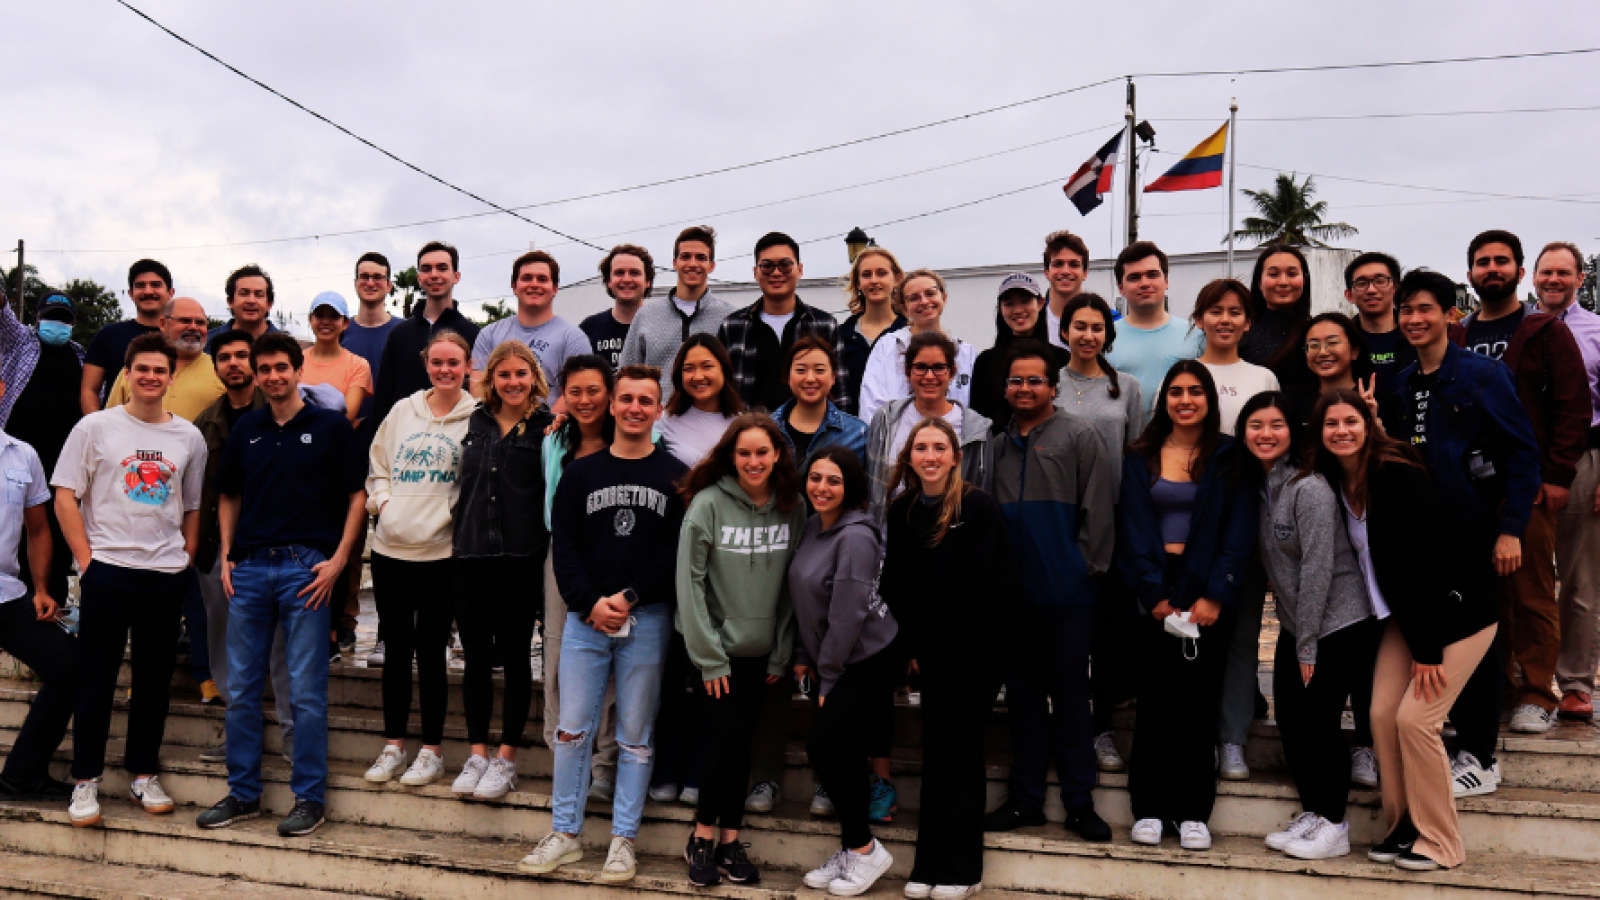 A large group of students from the Bachelor of Science in Business and Global Affairs program pose together during an immersion trip in the Dominican Republic.